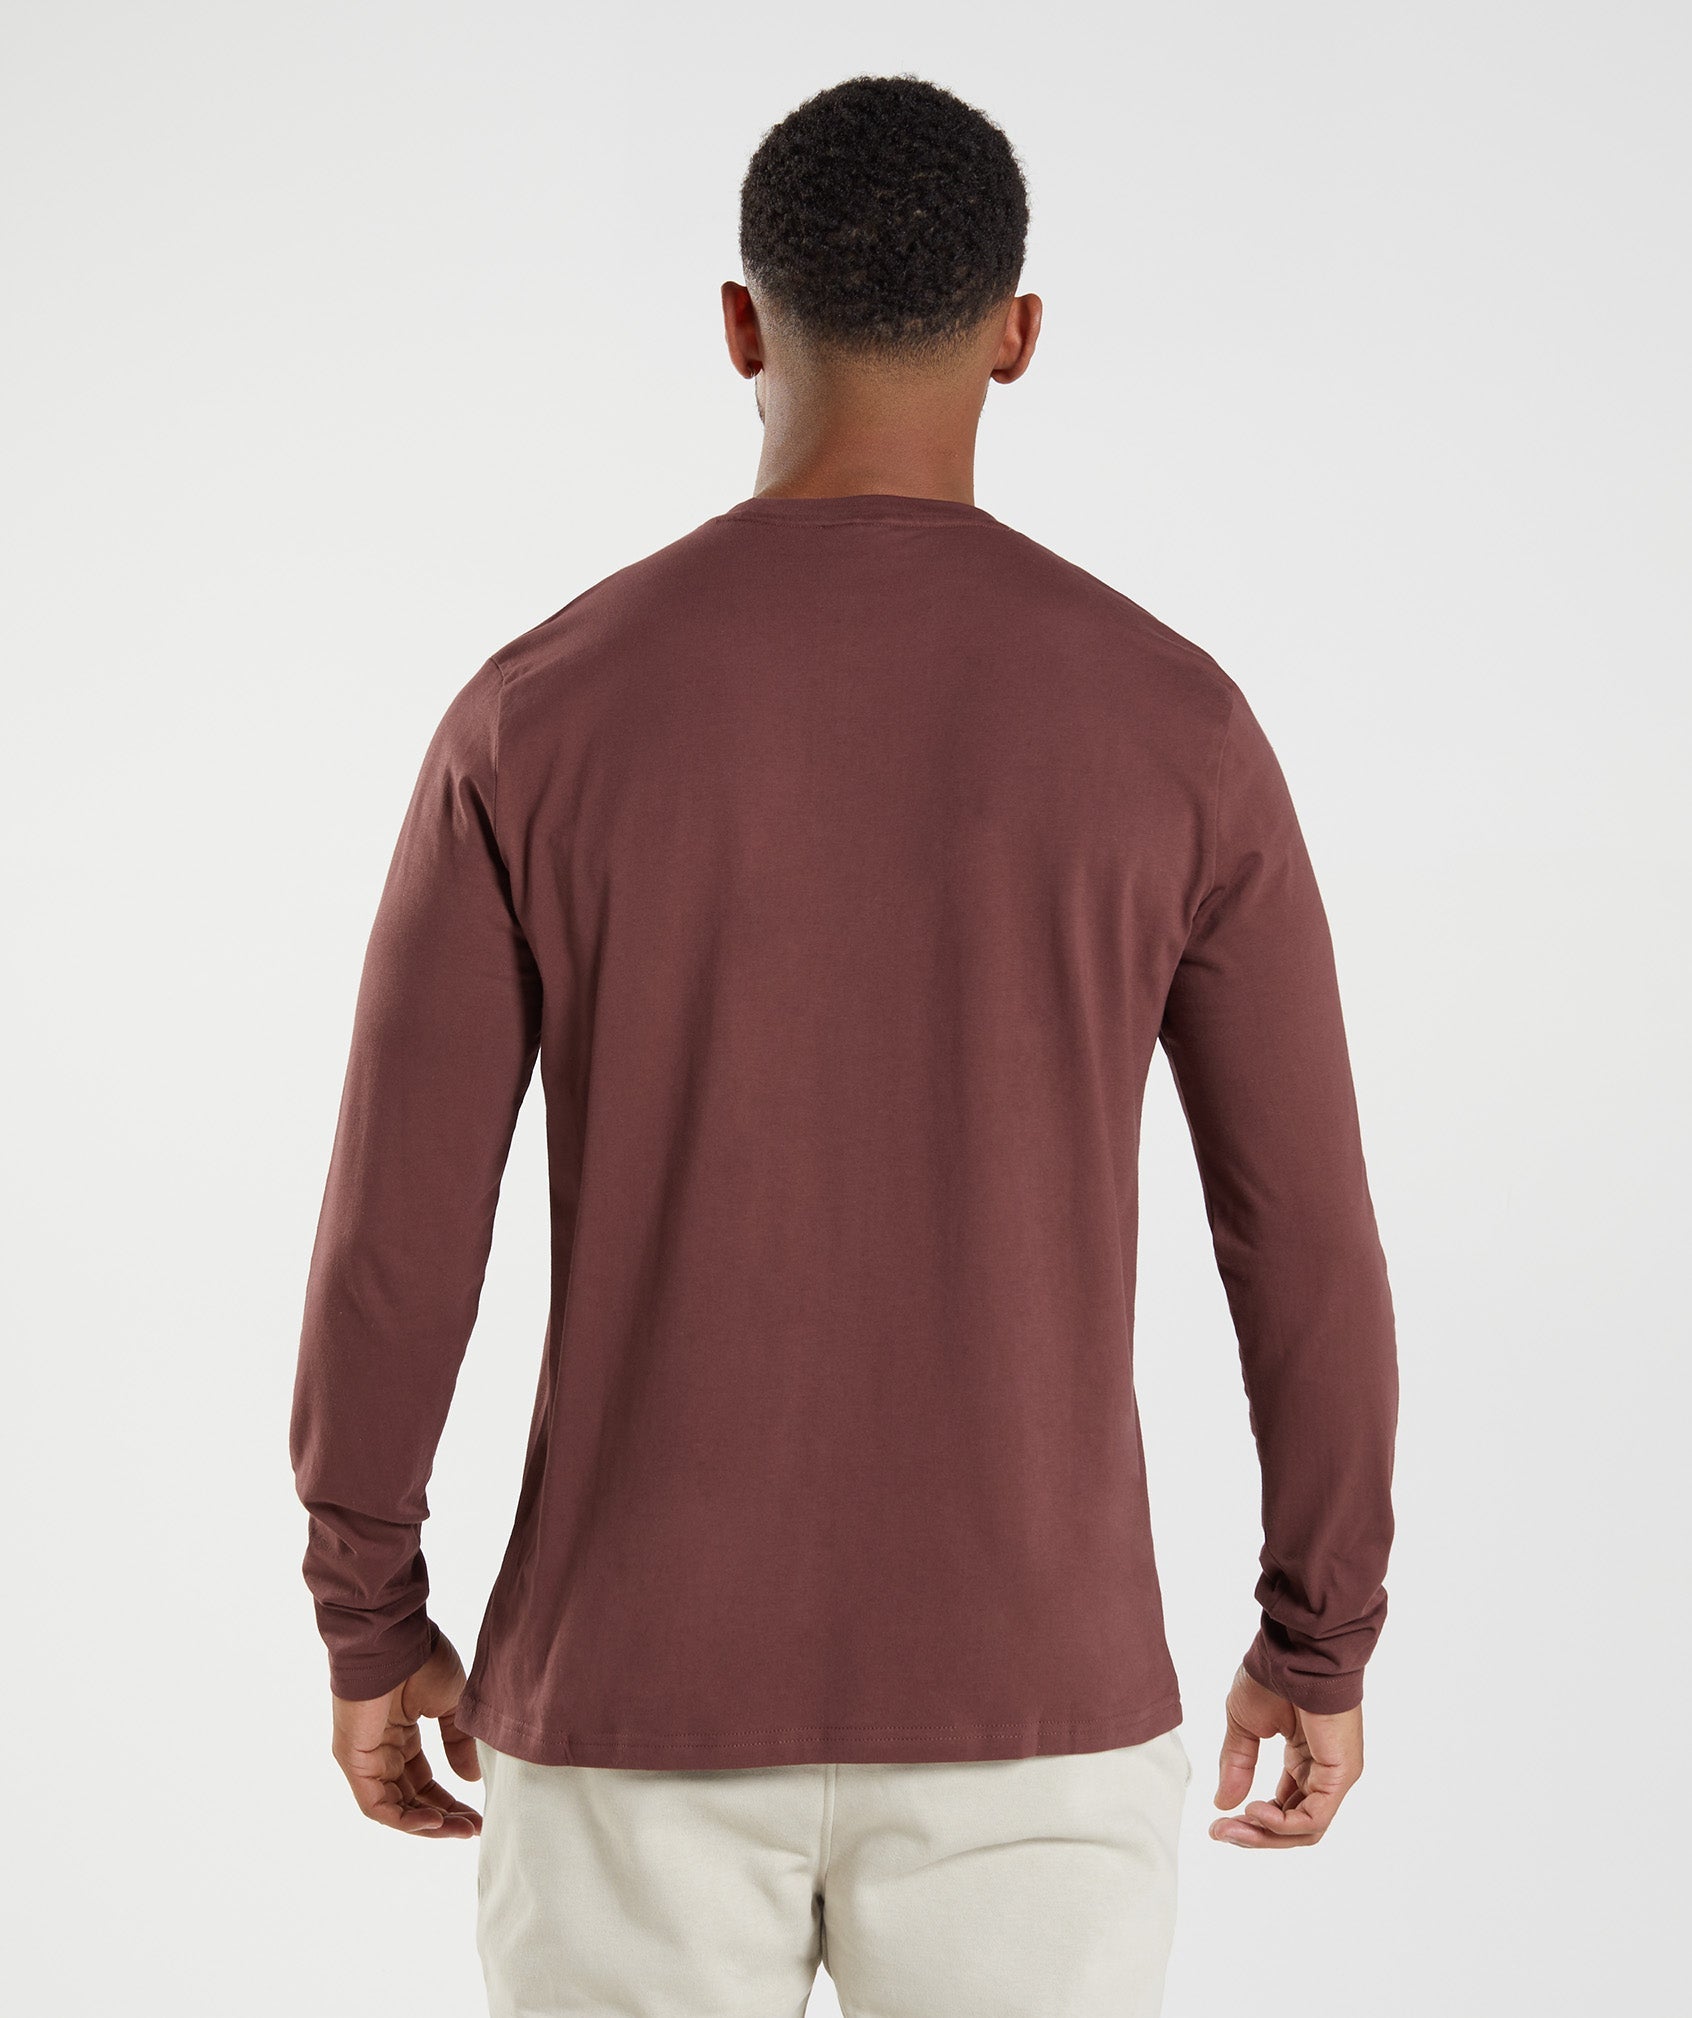 Crest Long Sleeve T-Shirt in Cherry Brown - view 2